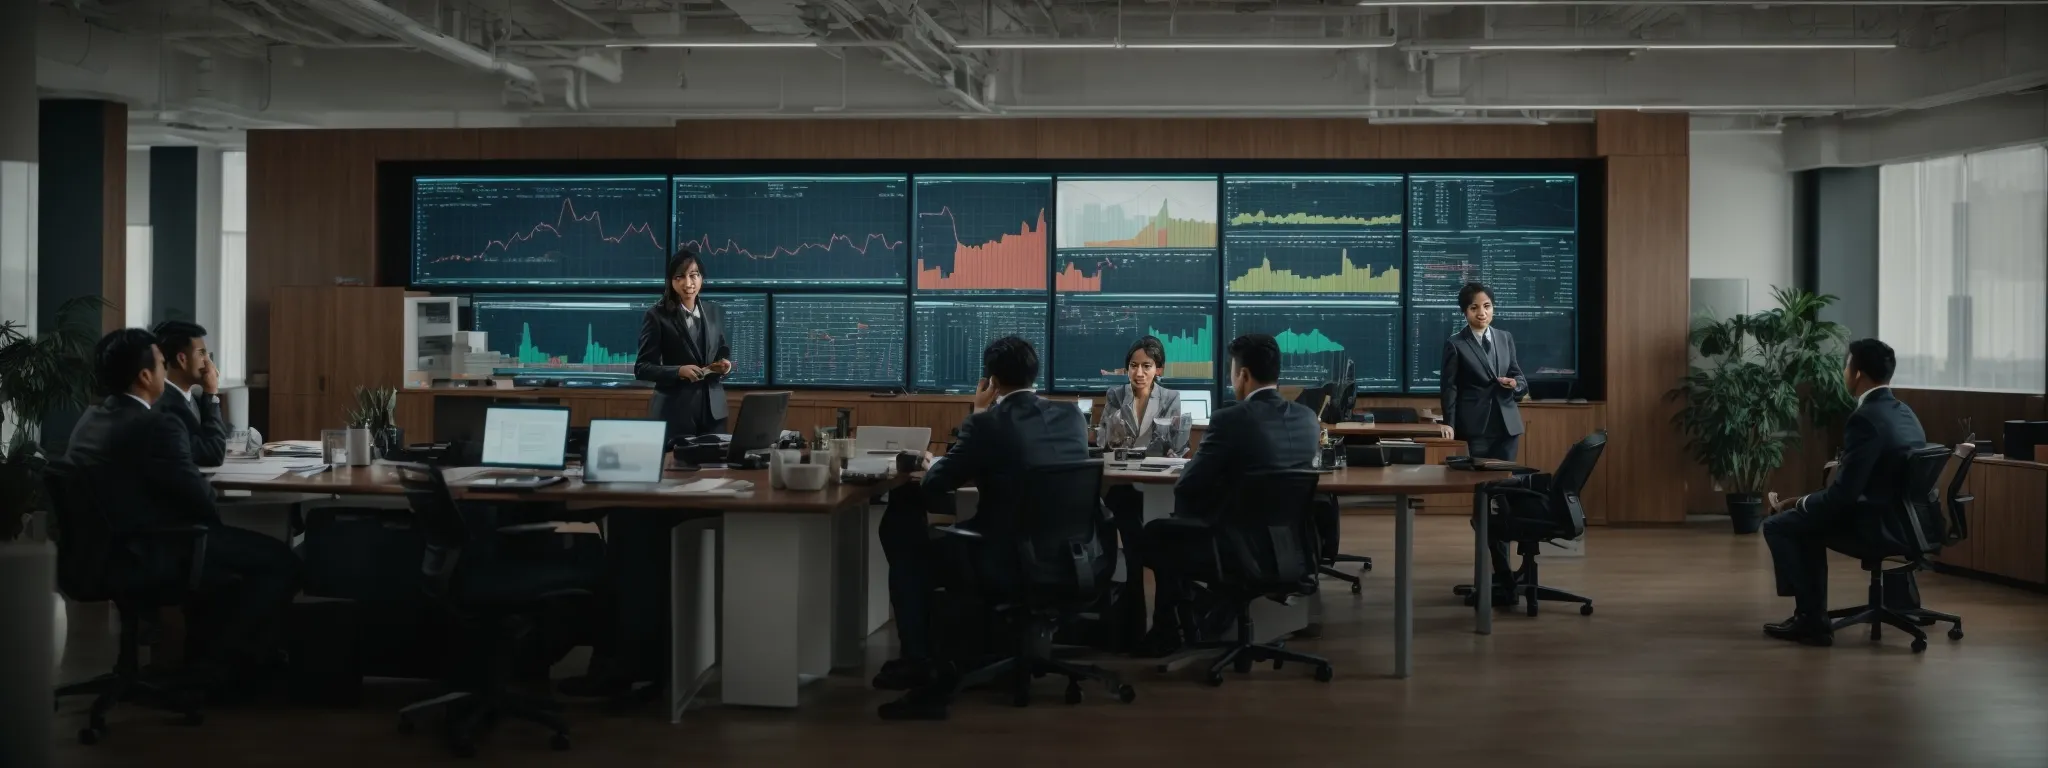 a strategic meeting with a spacious, bright office background featuring professionals analyzing data charts on a large monitor.